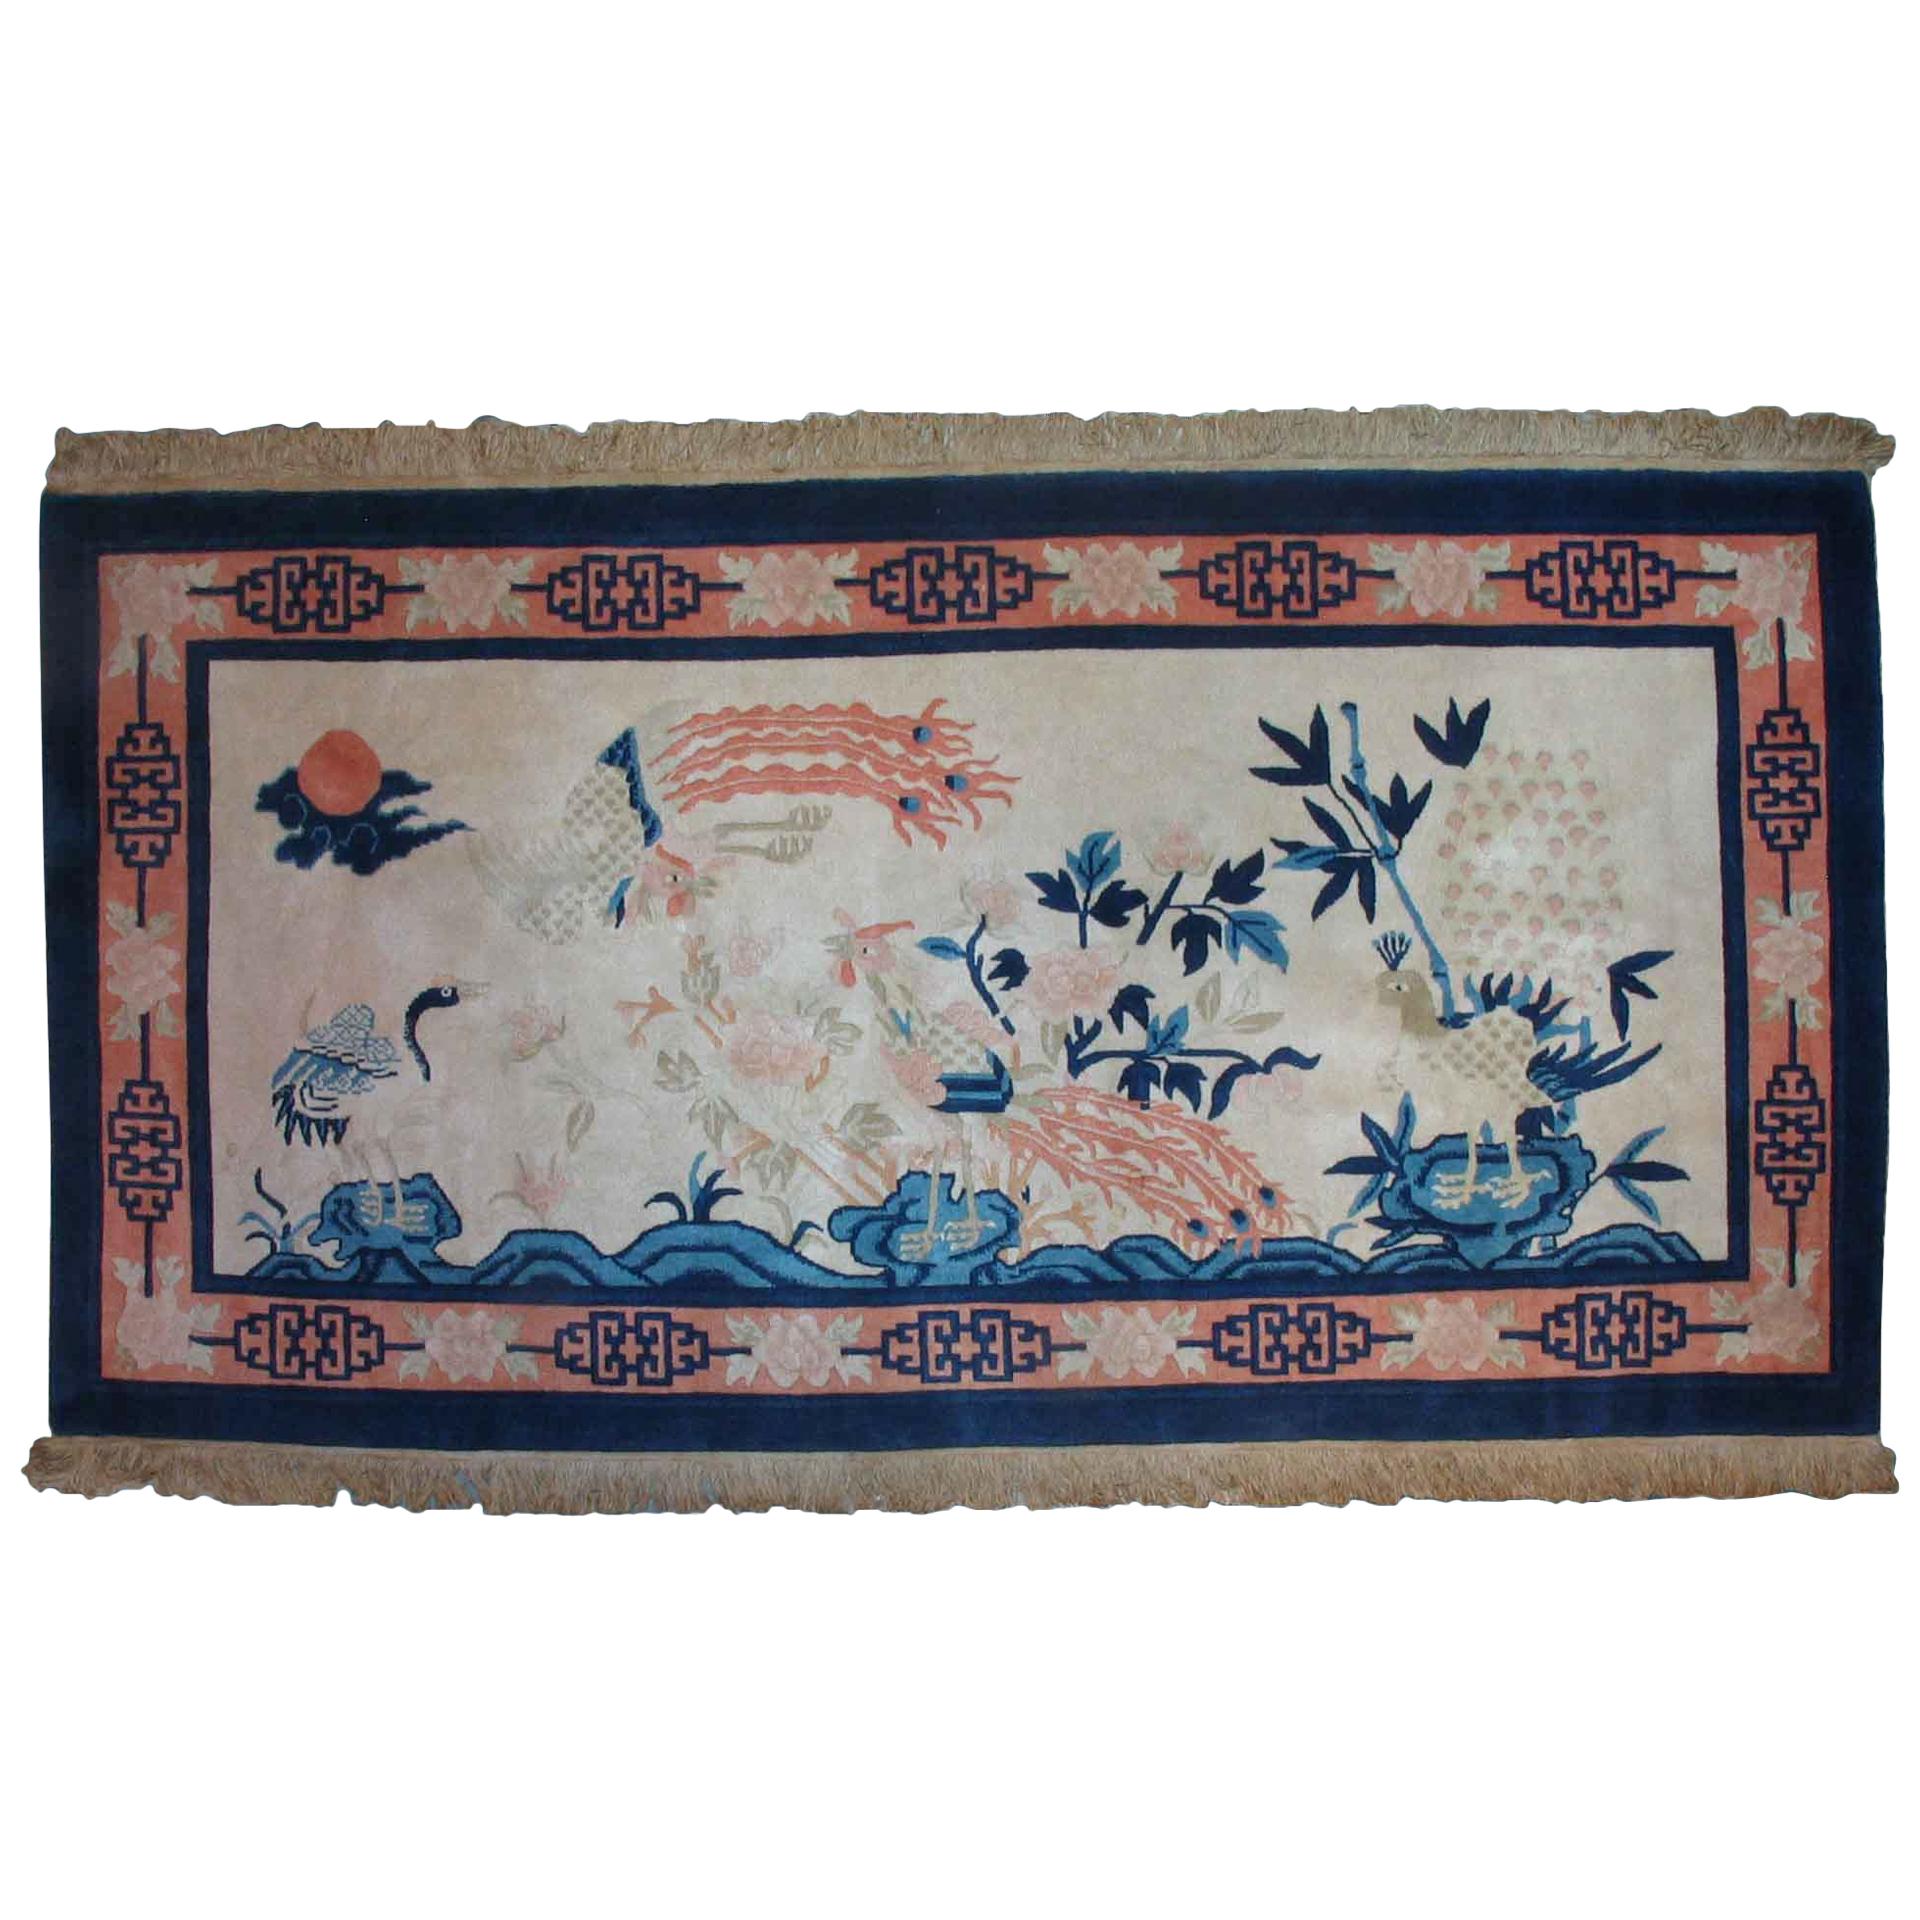 Antique Chinese Pictorial Rug, First Quarter of the 20th Century